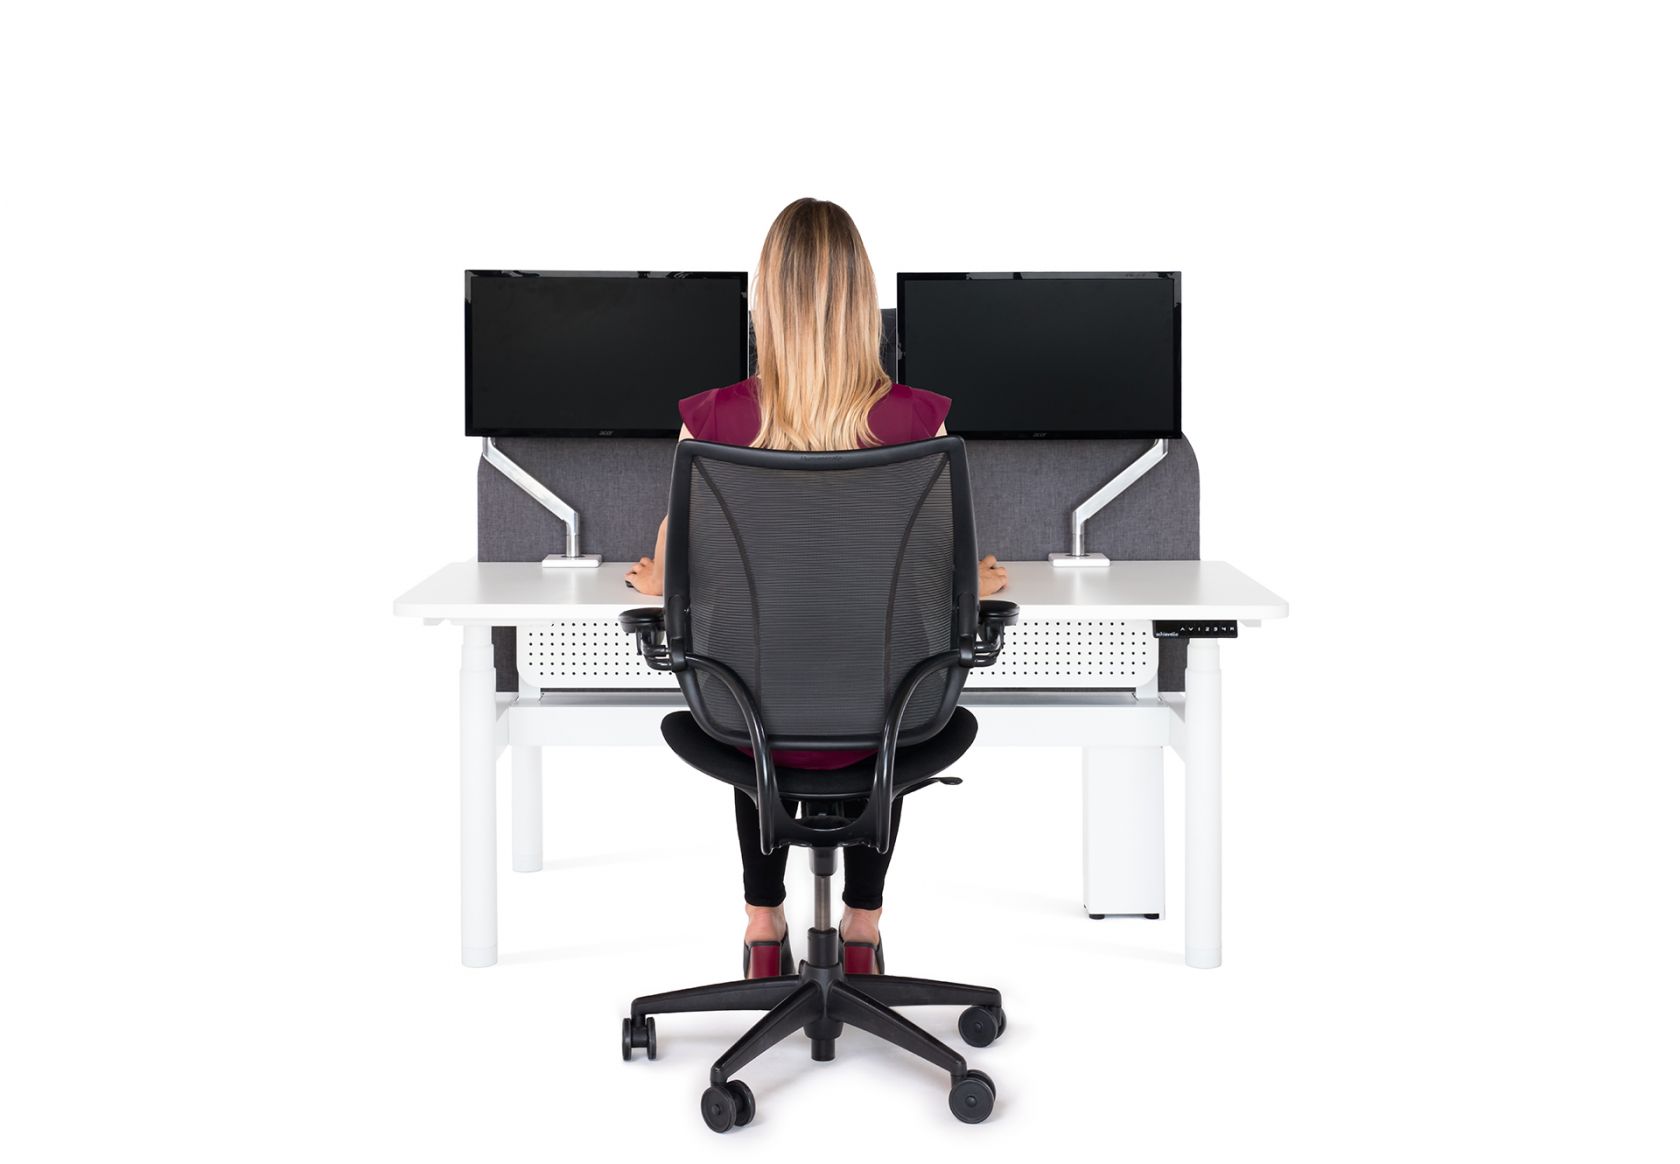 Neo Workstation and Liberty Mesh Chair